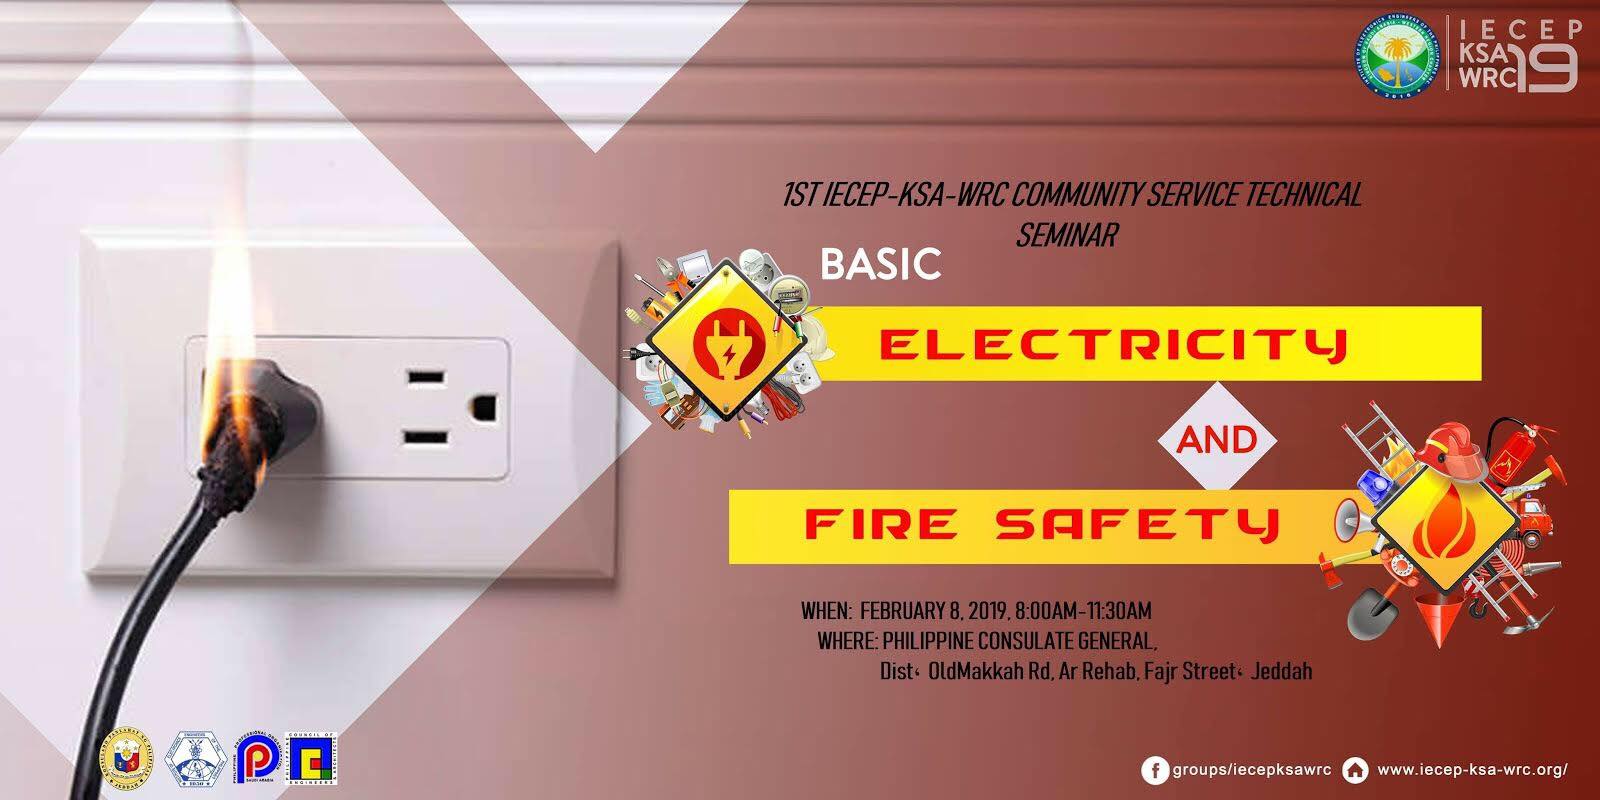 Basic Electricity and Fire Safety